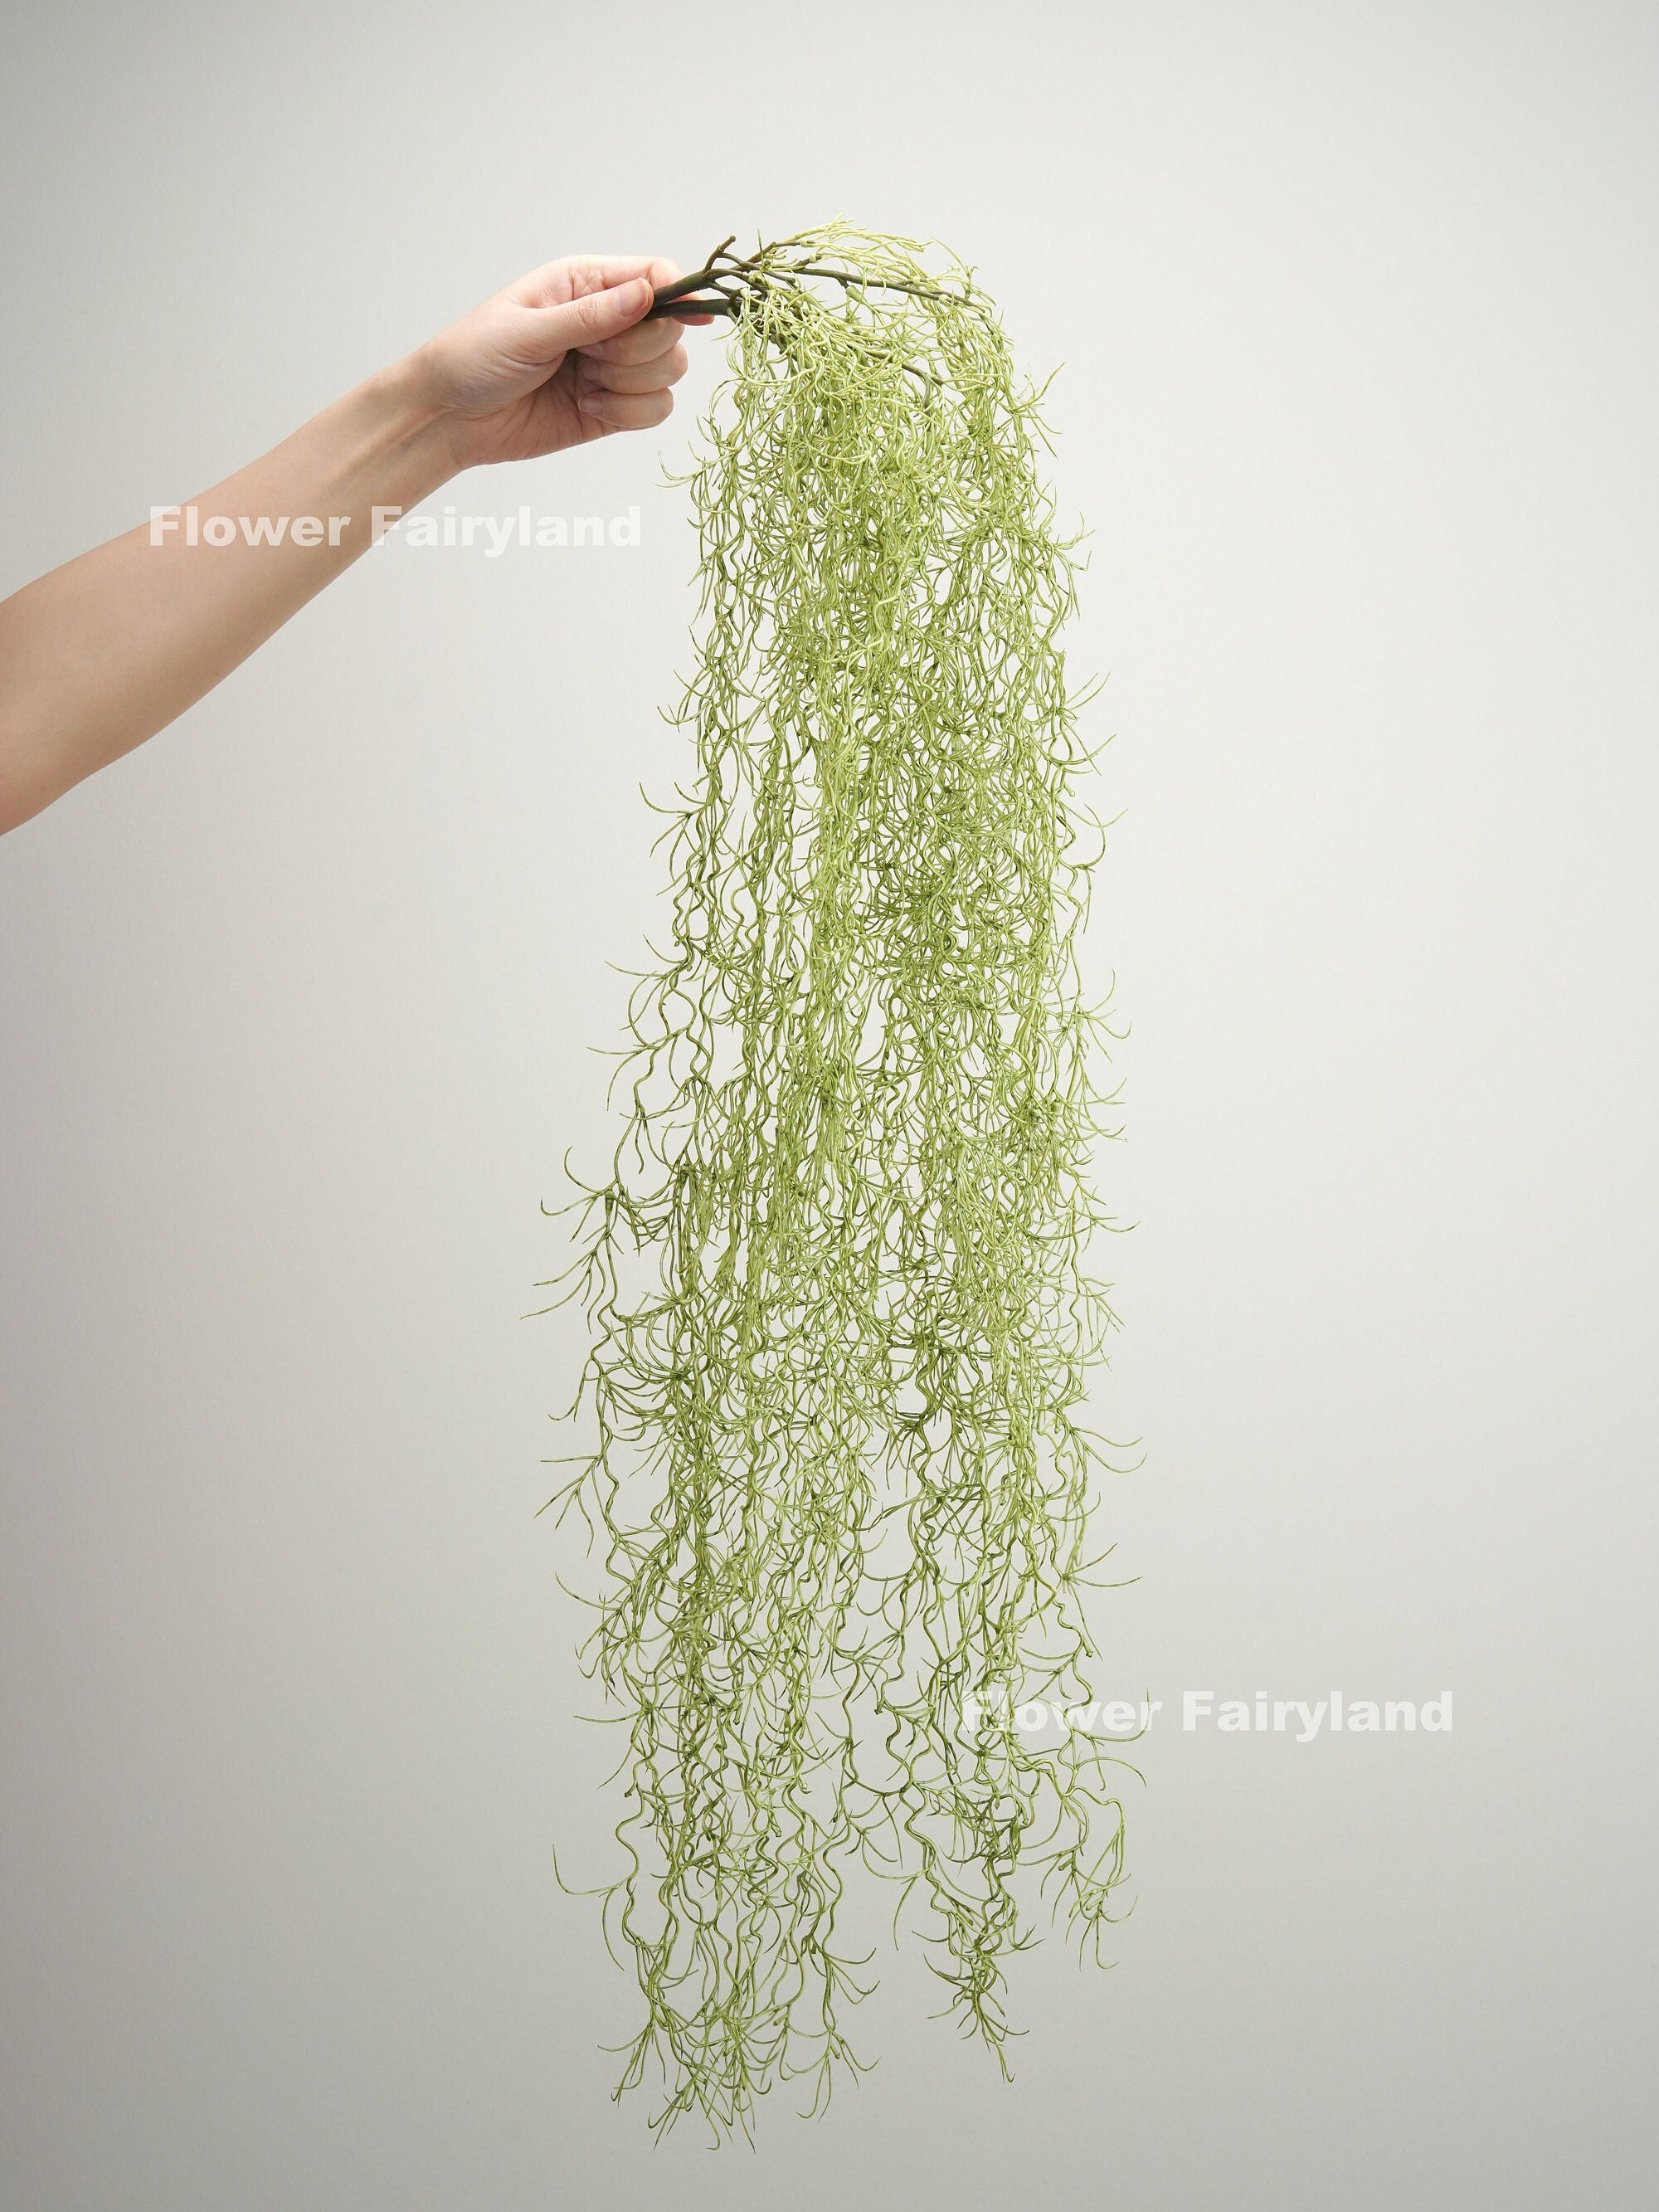 Zukuco Artificial Moss Vines Hanging Plants, Faux Greenery Moss